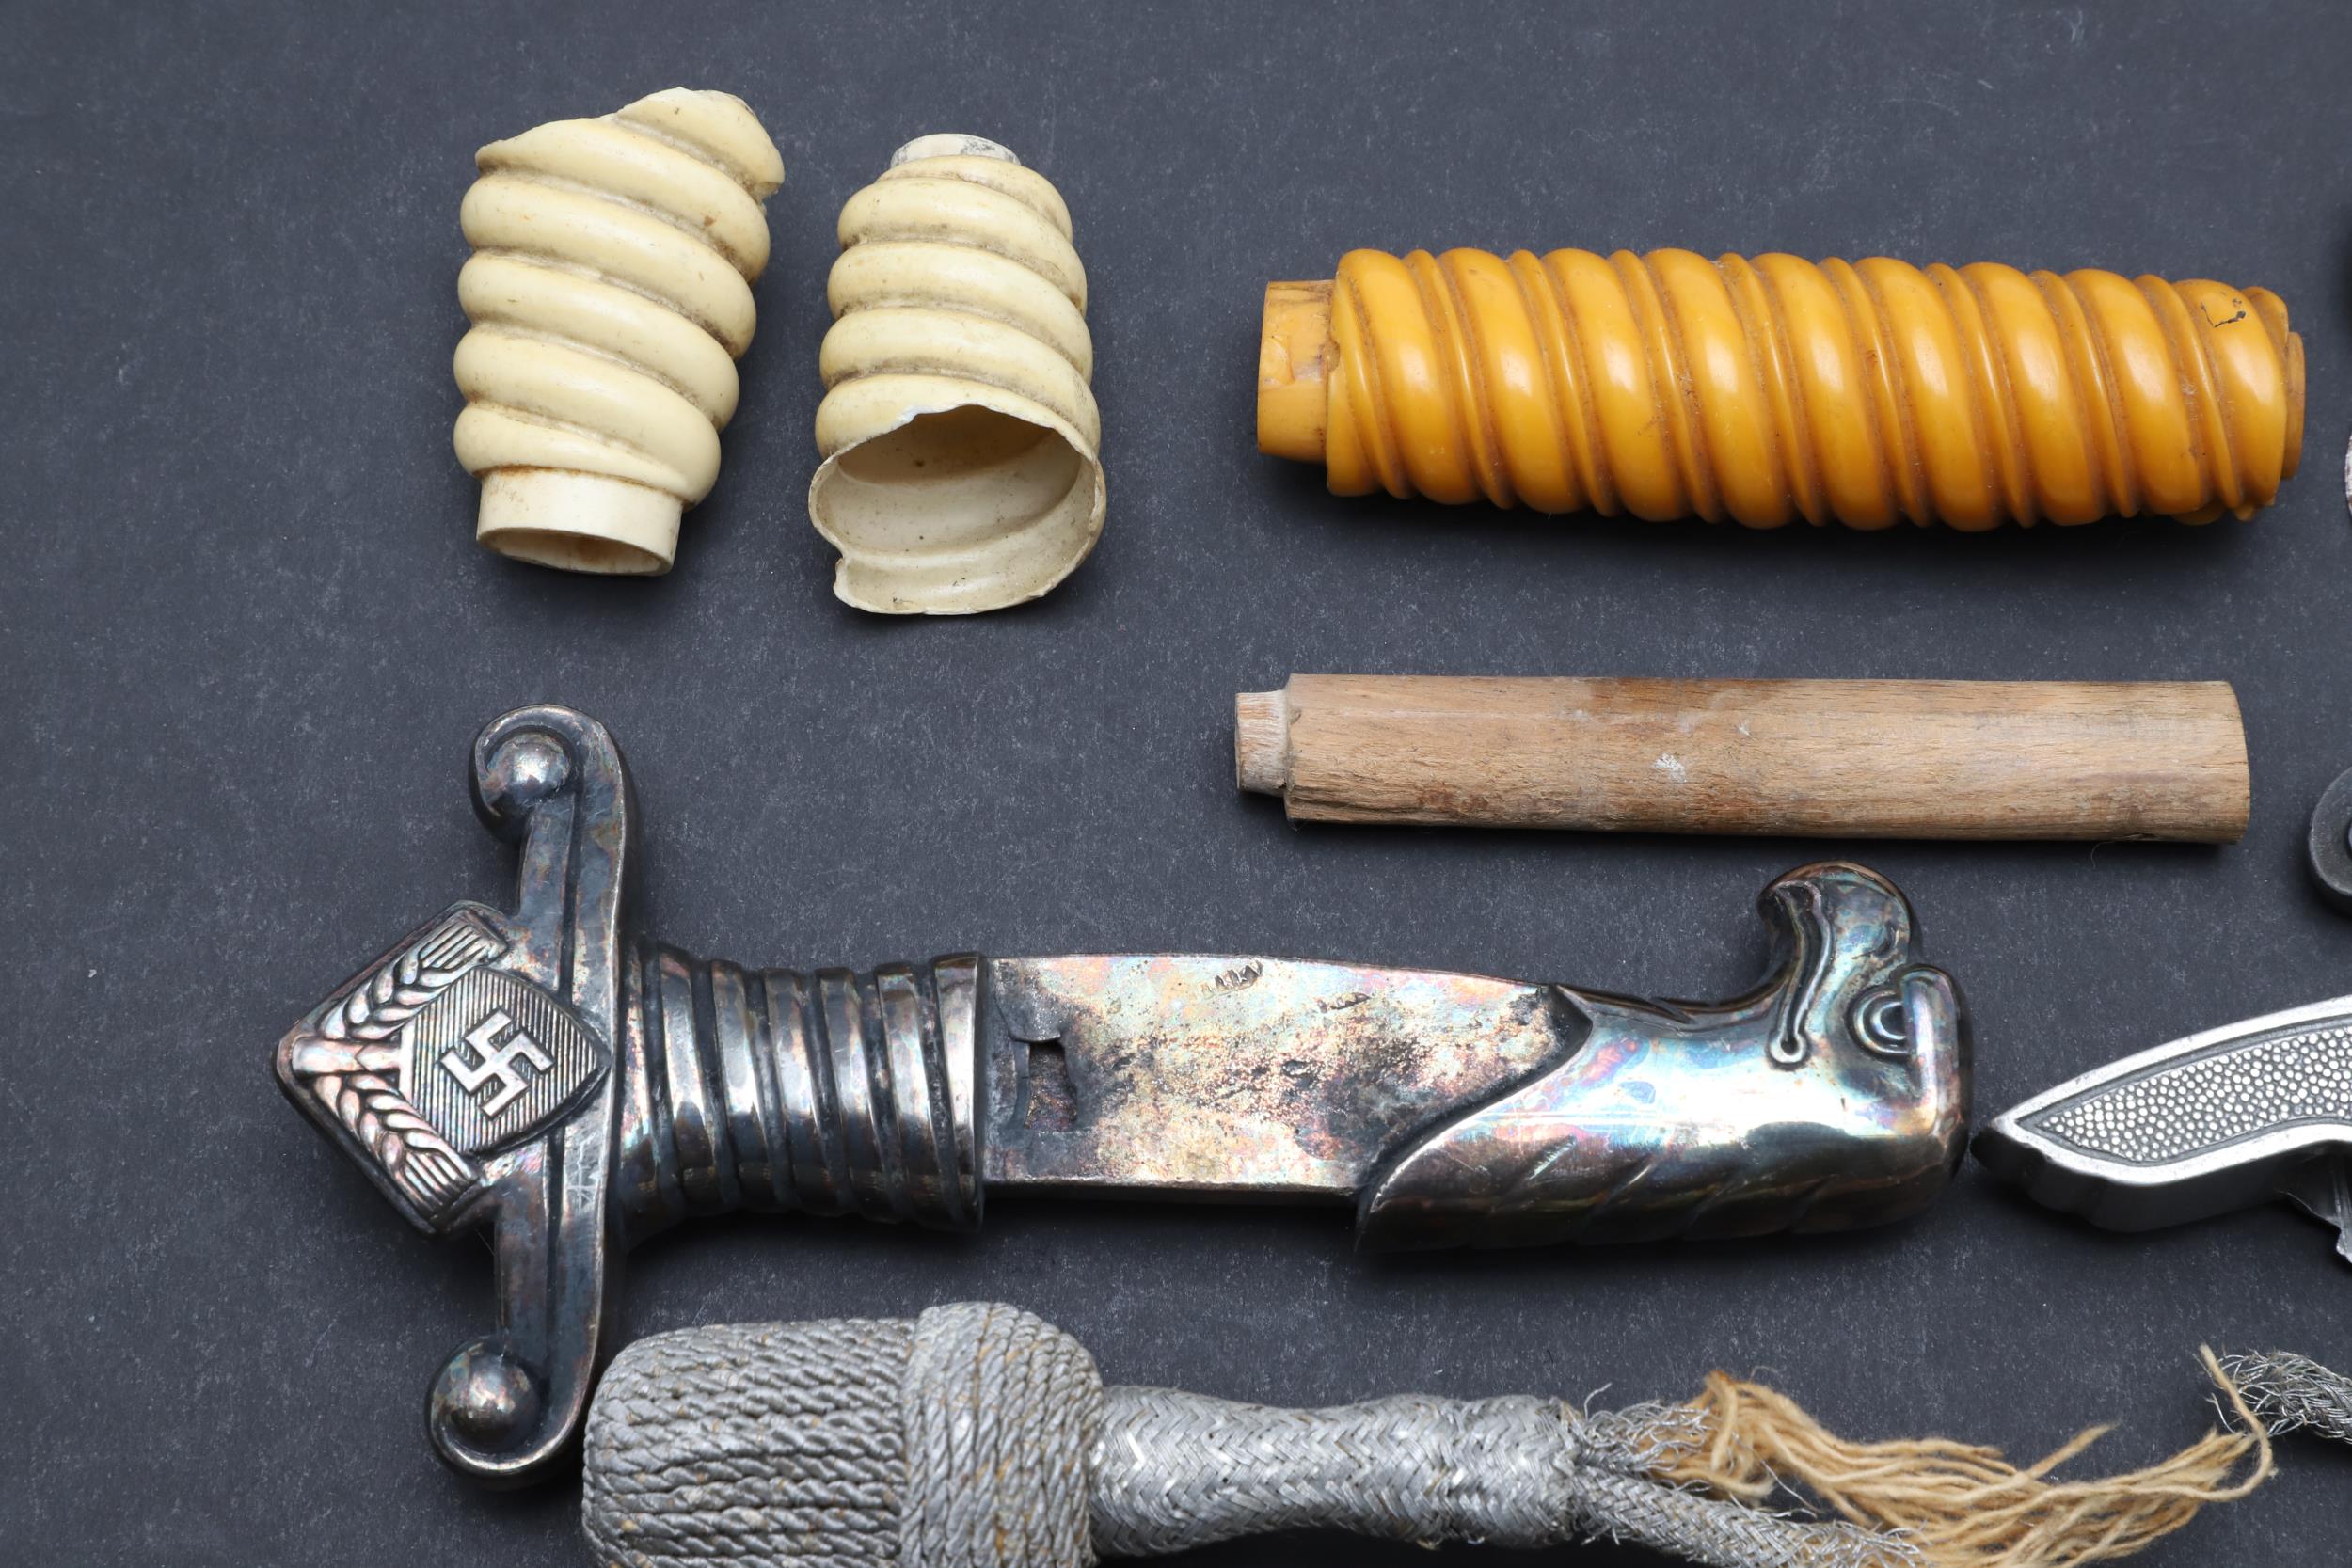 AN INTERESTING AND USEFUL COLLECTION OF SECOND WORLD WAR GERMAN DAGGER PARTS. - Image 13 of 14